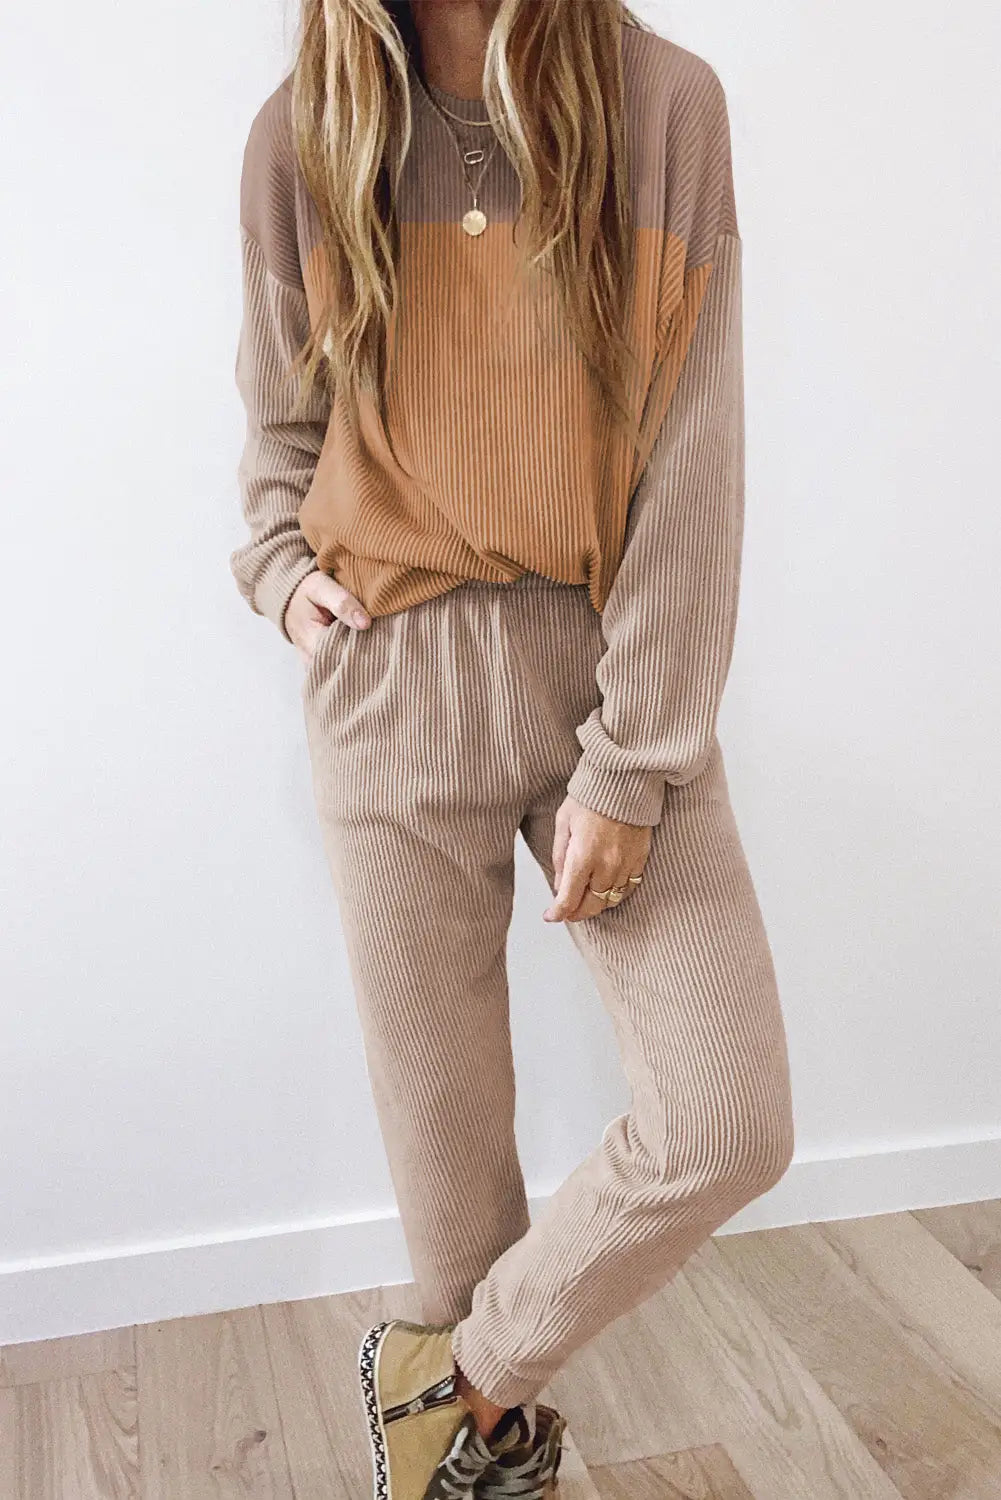 Brown corded 2pcs colorblock pullover and pants outfit - 2xl / 75% polyester + 20% viscose + 5% elastane - joggers sets